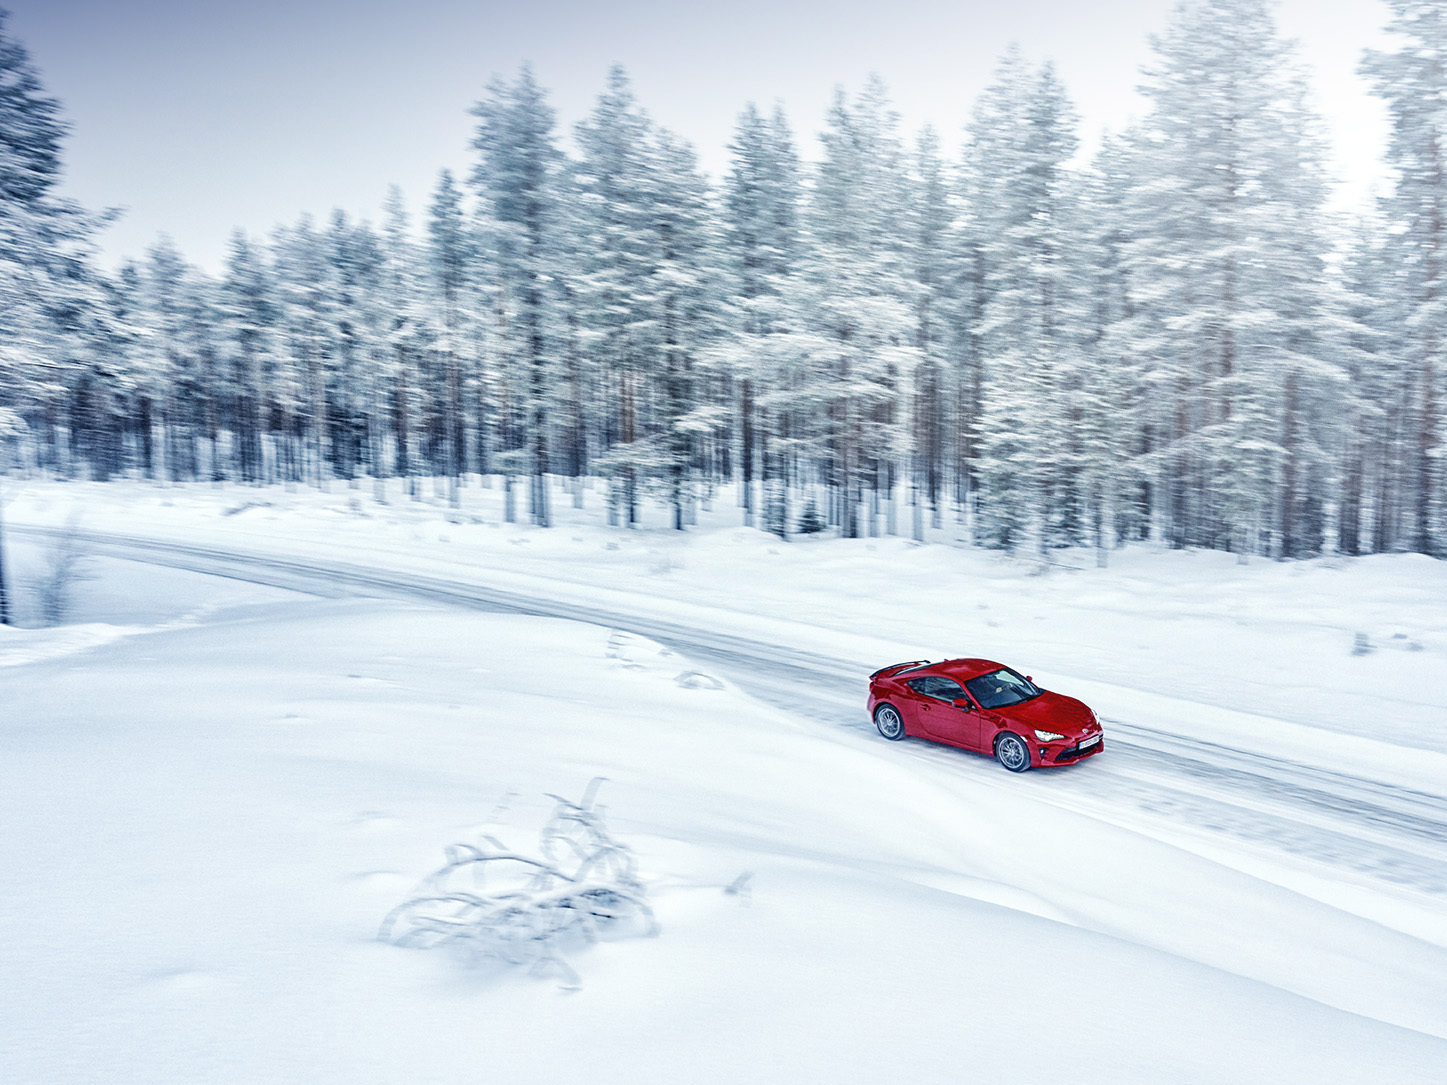 Putting the Toyota GT86 on ice